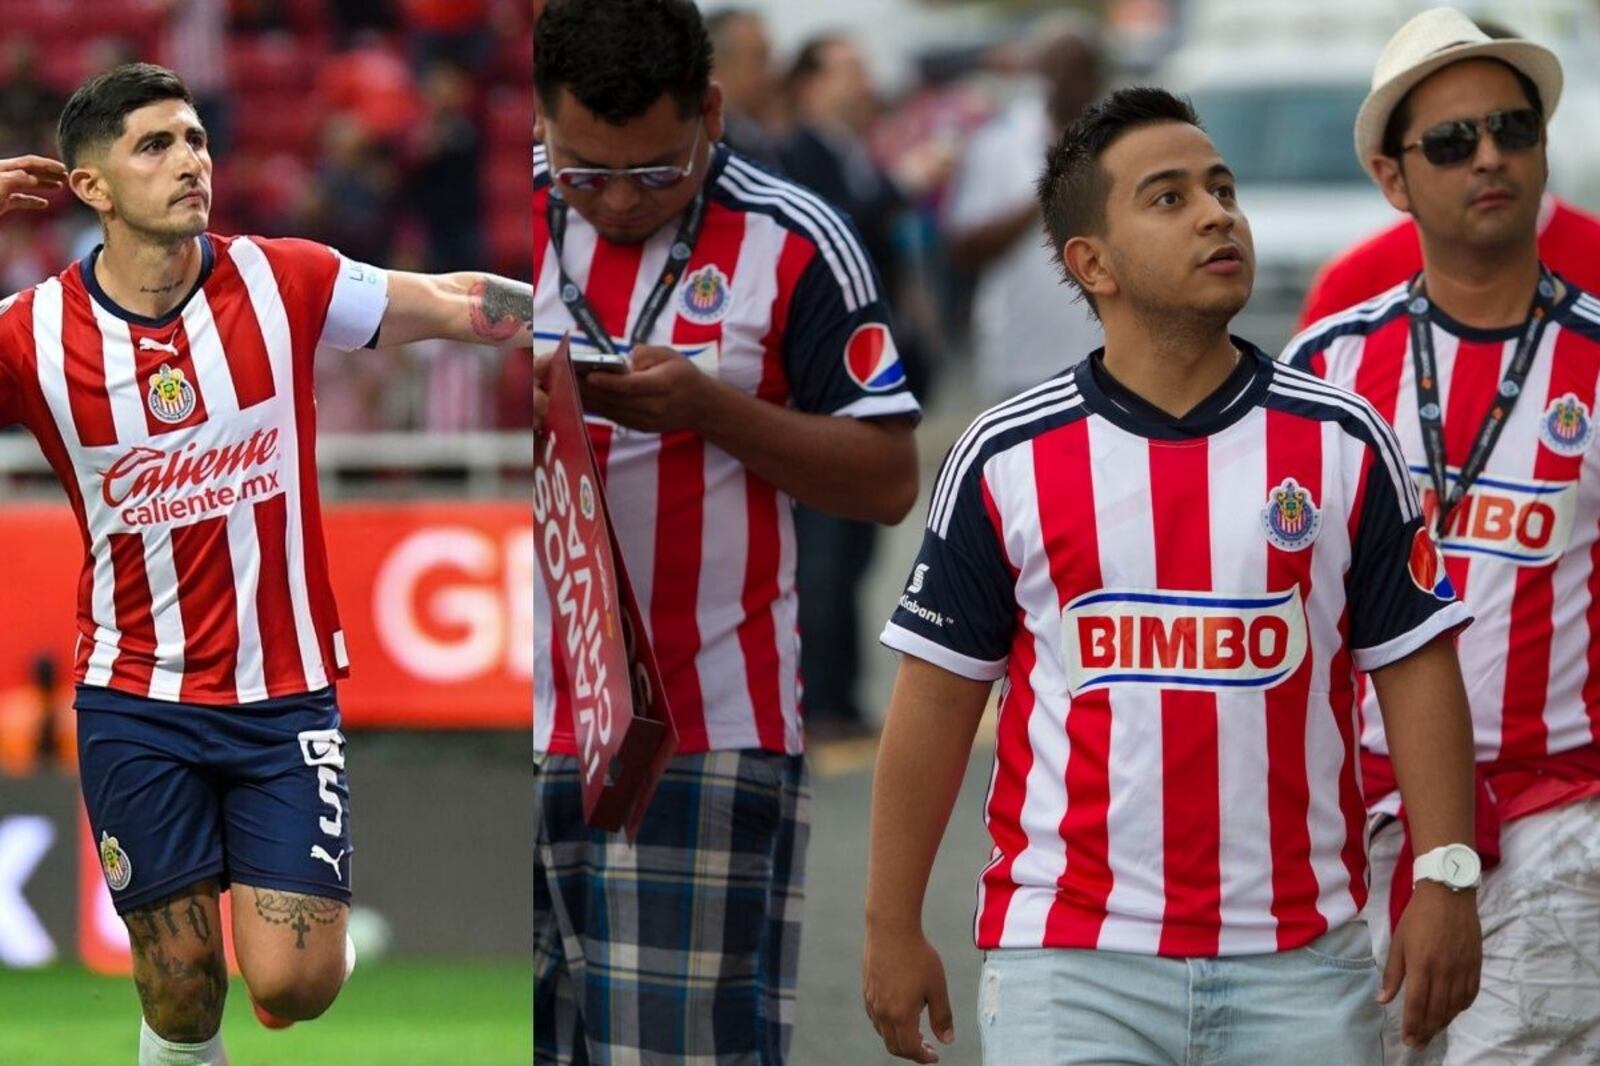 The new reinforcement that Chivas has and that will make the fans happy